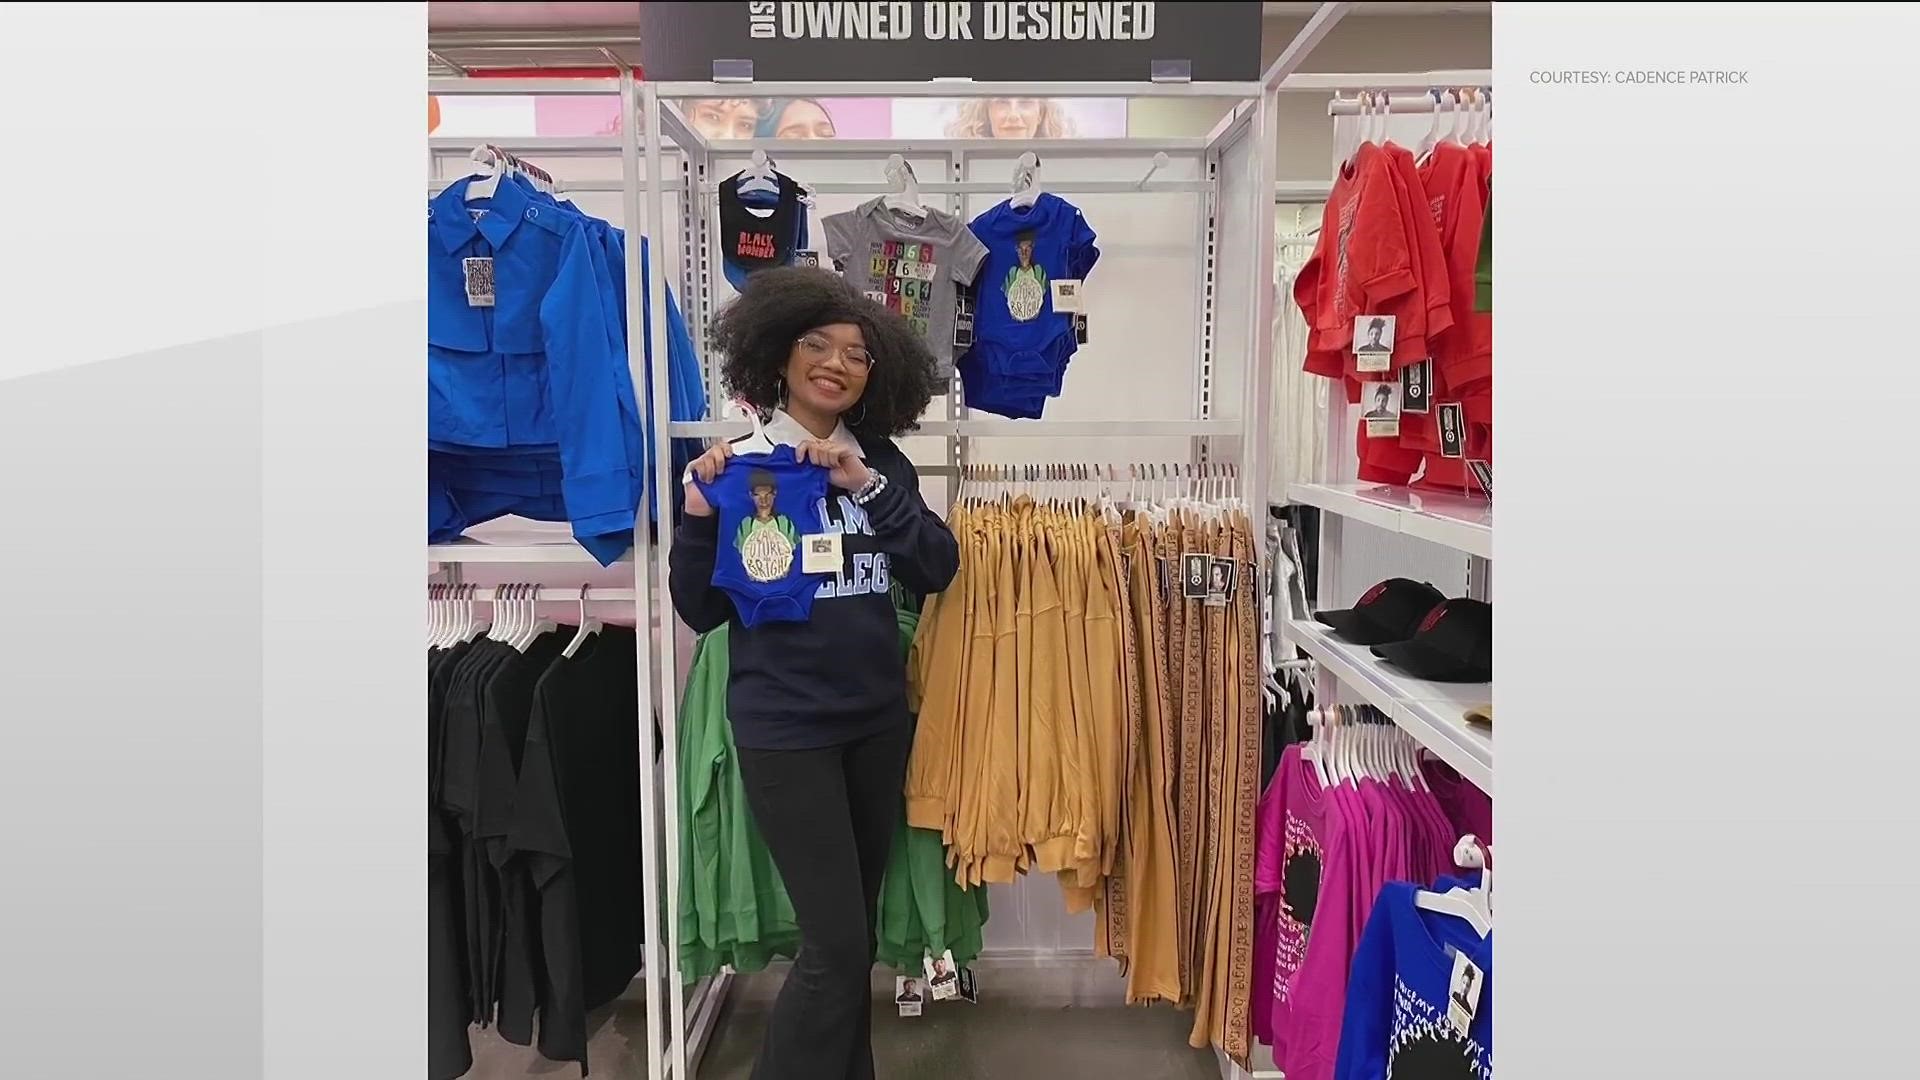 Spelman student Cadence Patrick is a winner of Target’s HBCU Design Challenge. Her design is featured on several products in Target’s Black History Month collection,